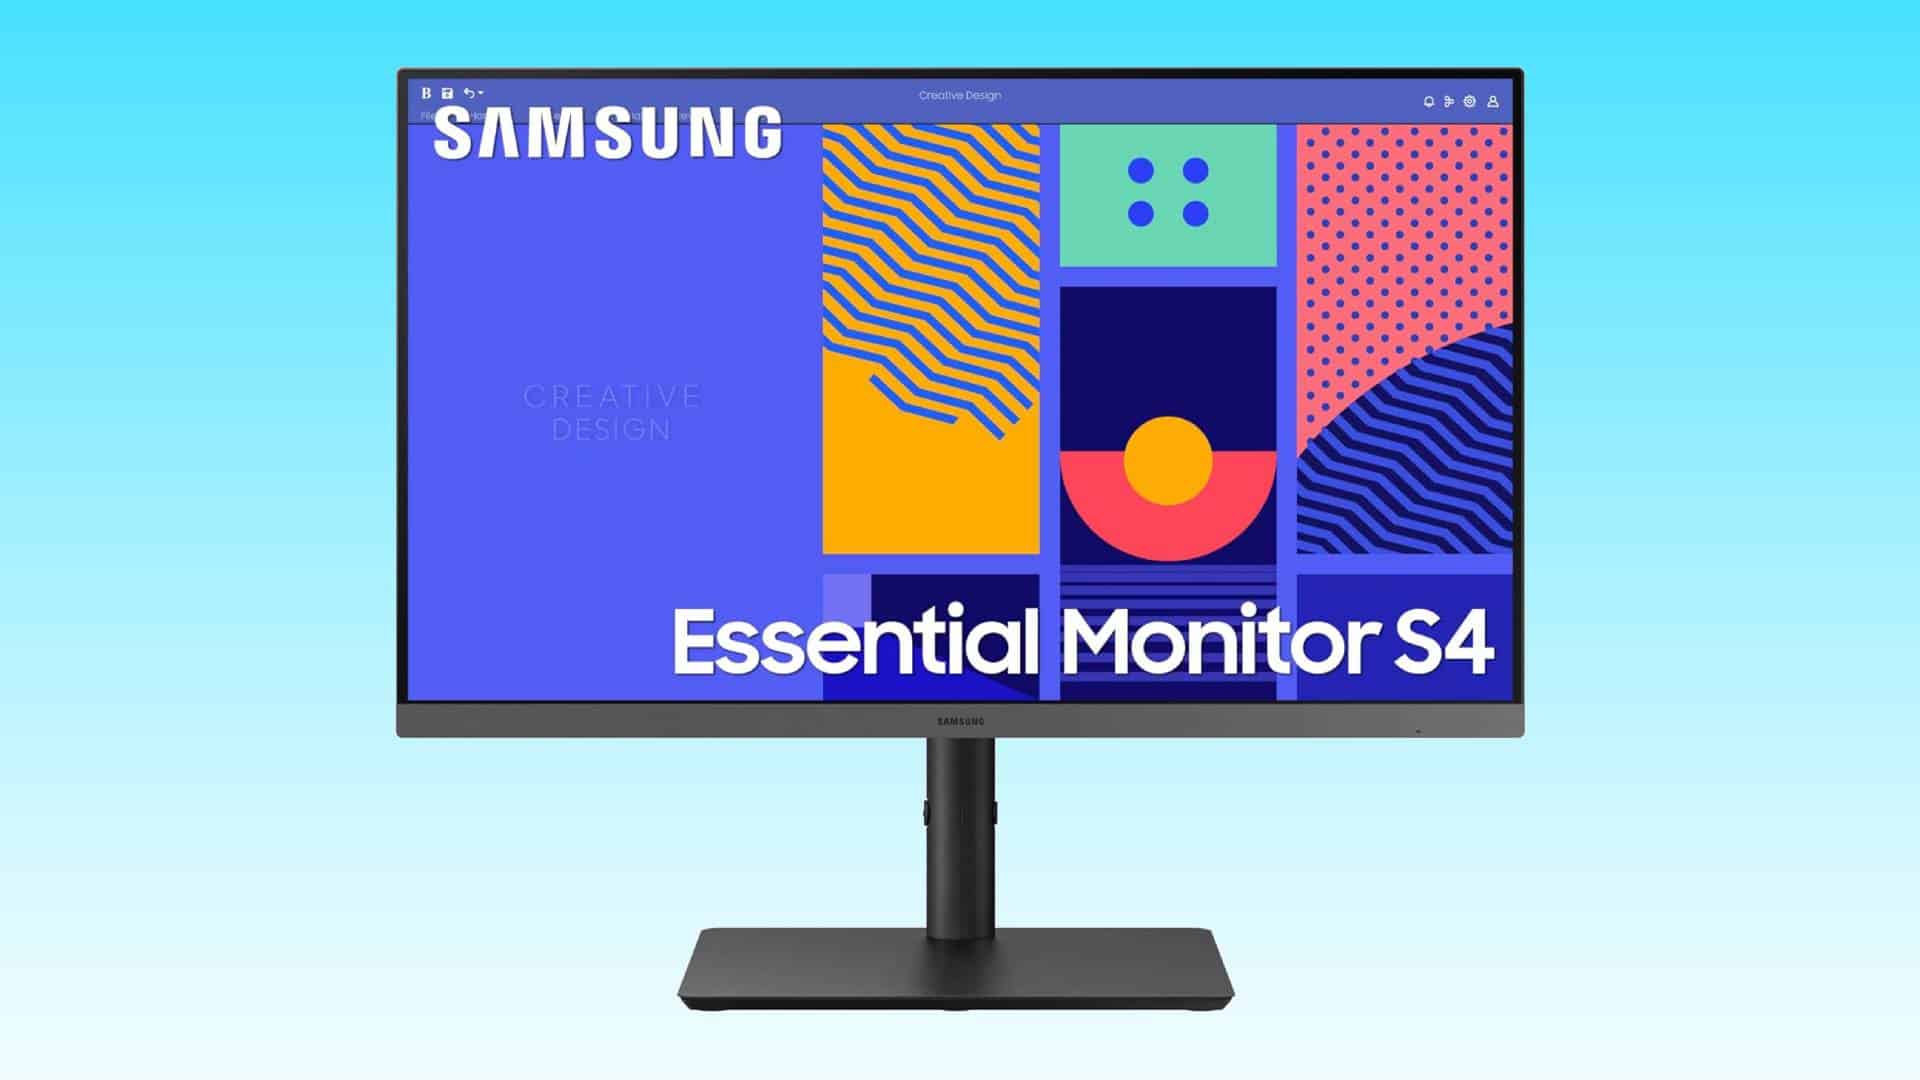 Samsung QLED monitor S43GC displayed on a computer monitor with graphic design-themed wallpaper, available as an Amazon deal.